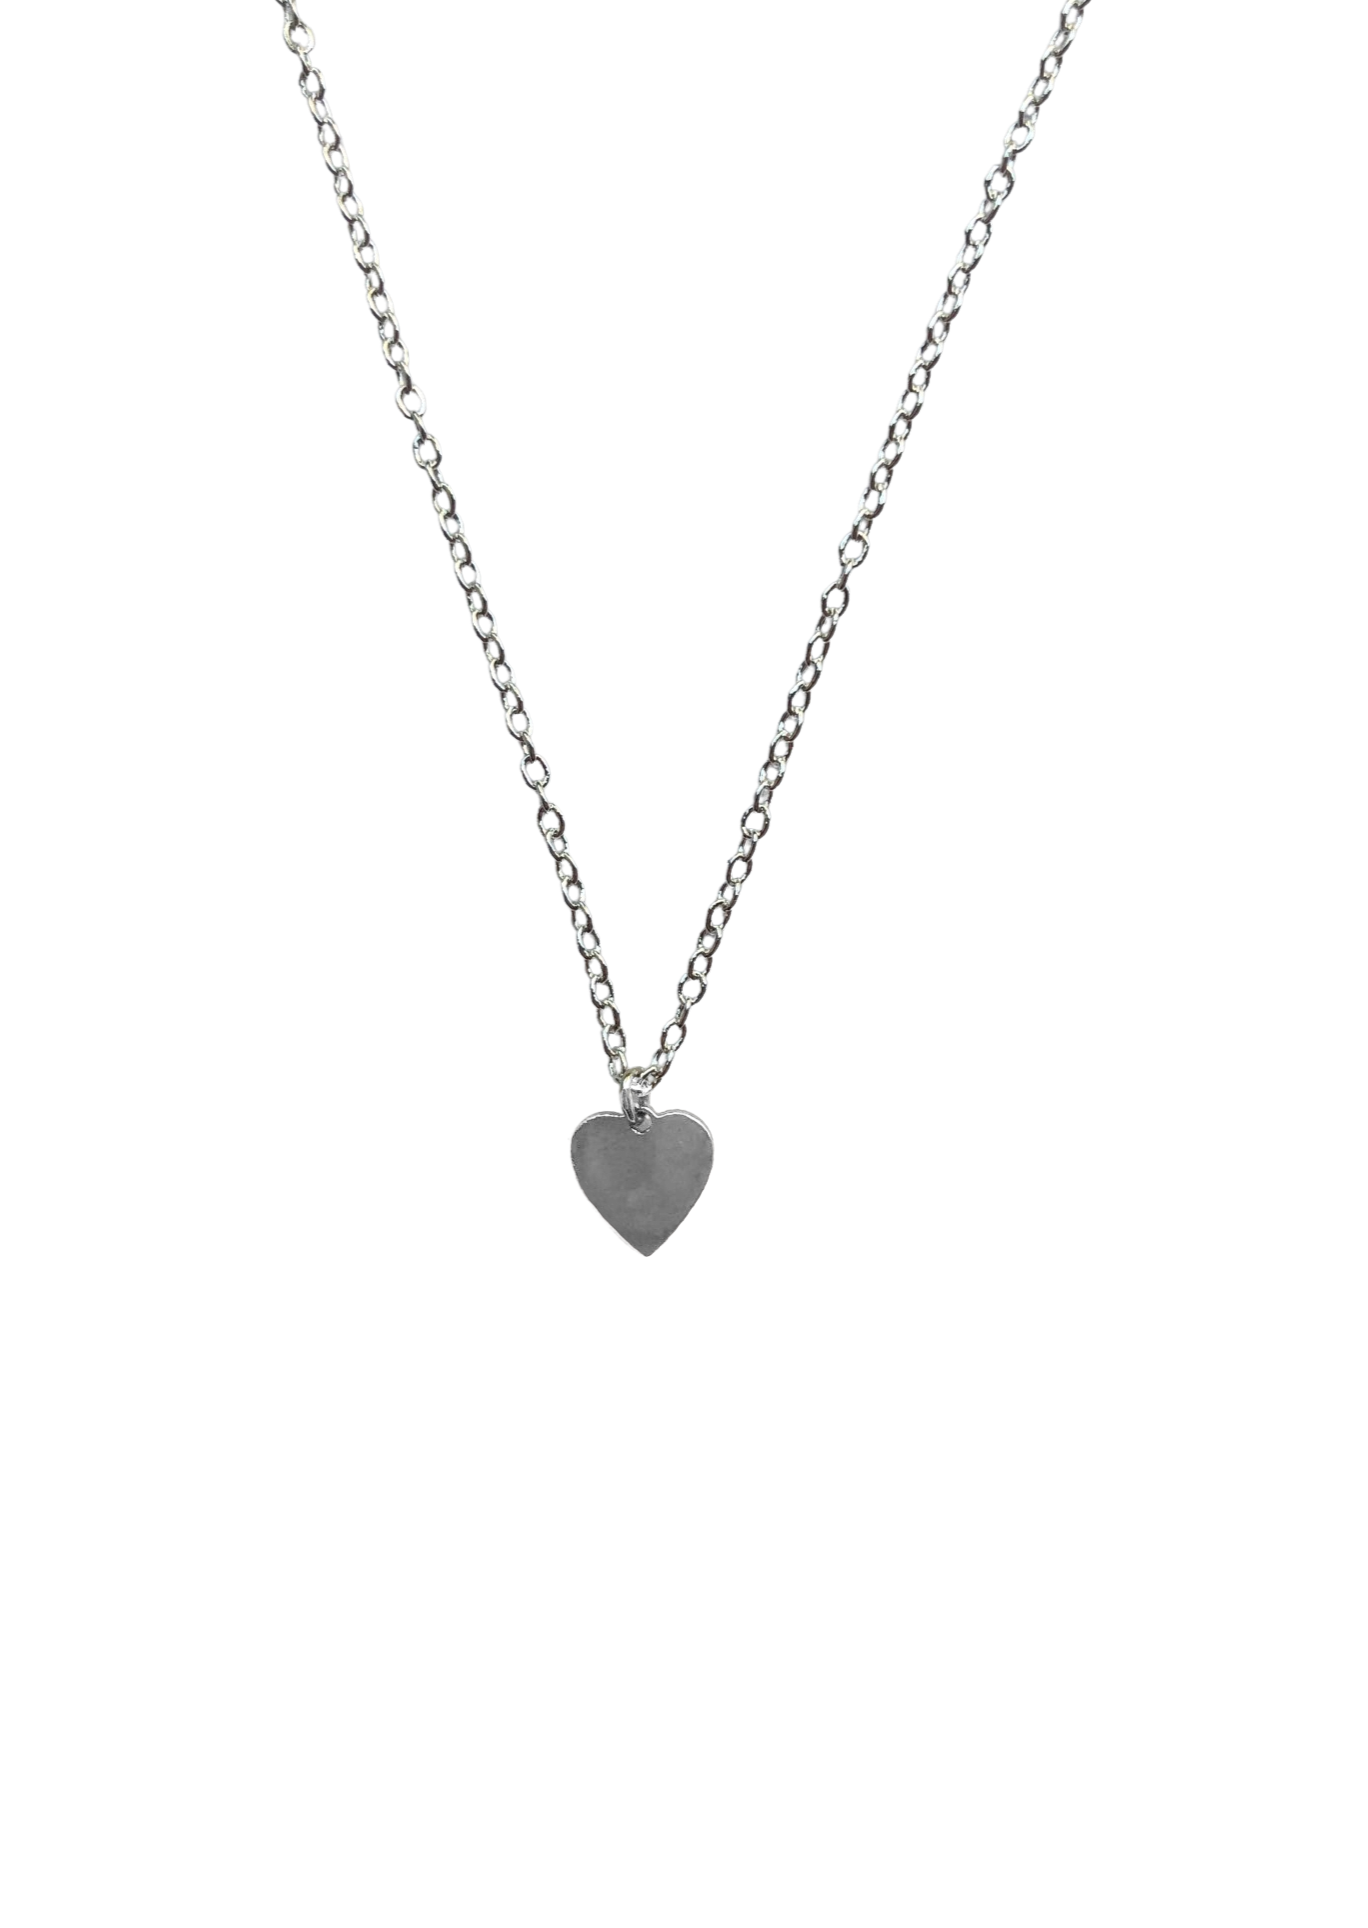 Heart Charm Necklace - .925 Sterling Silver